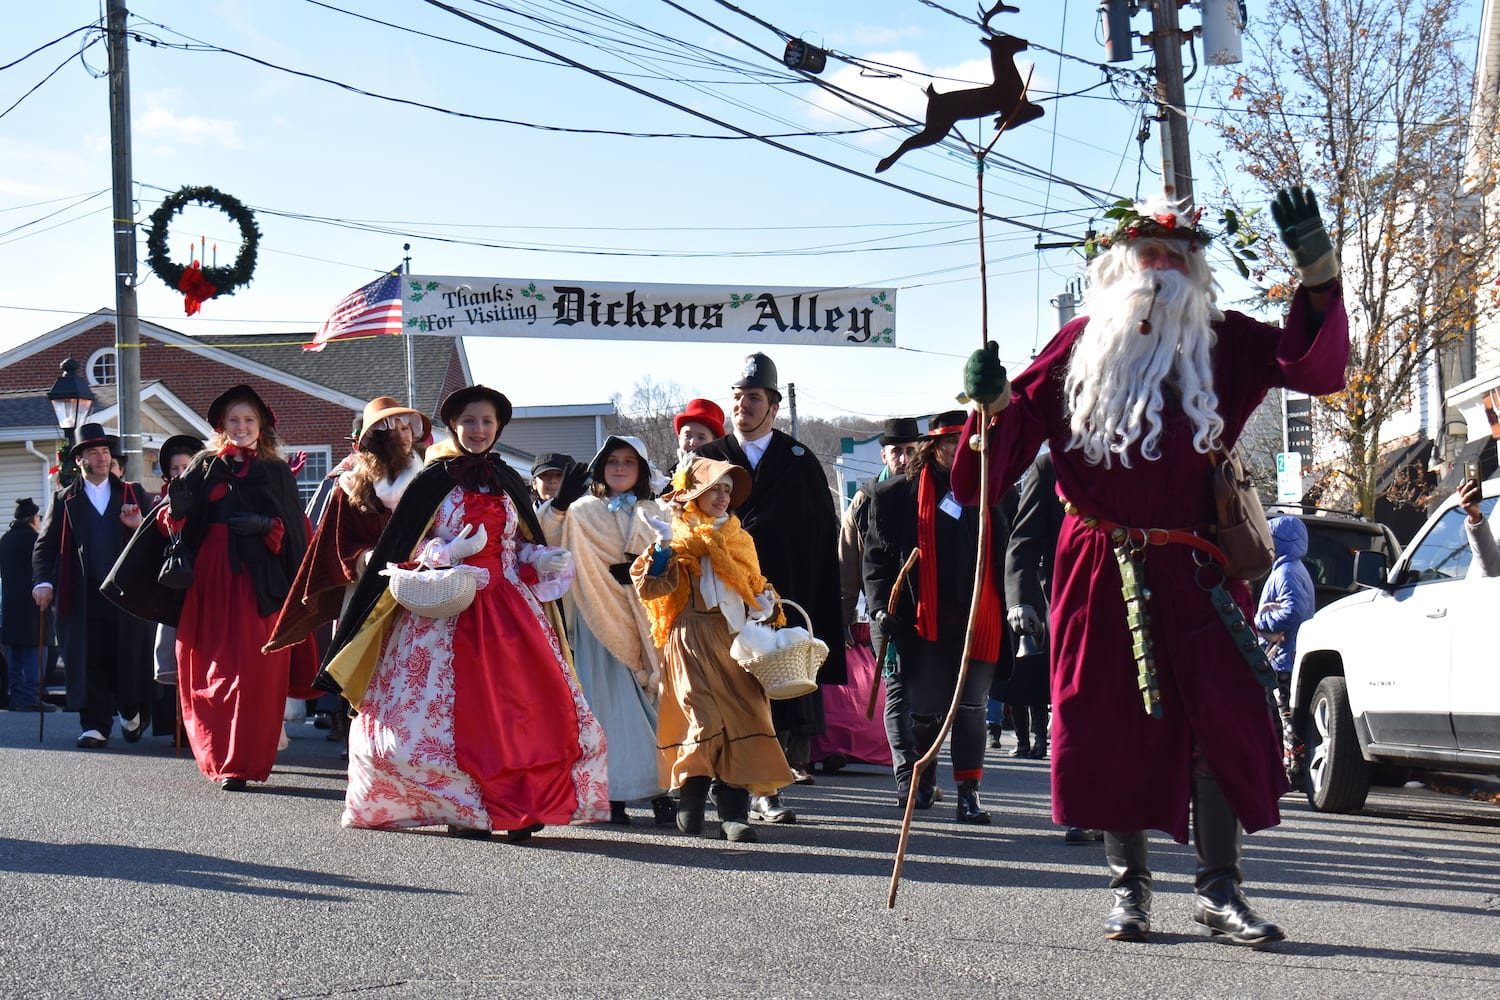 Open casting call for 26th annual Port Jefferson Charles Dickens Festival | TBR News Media